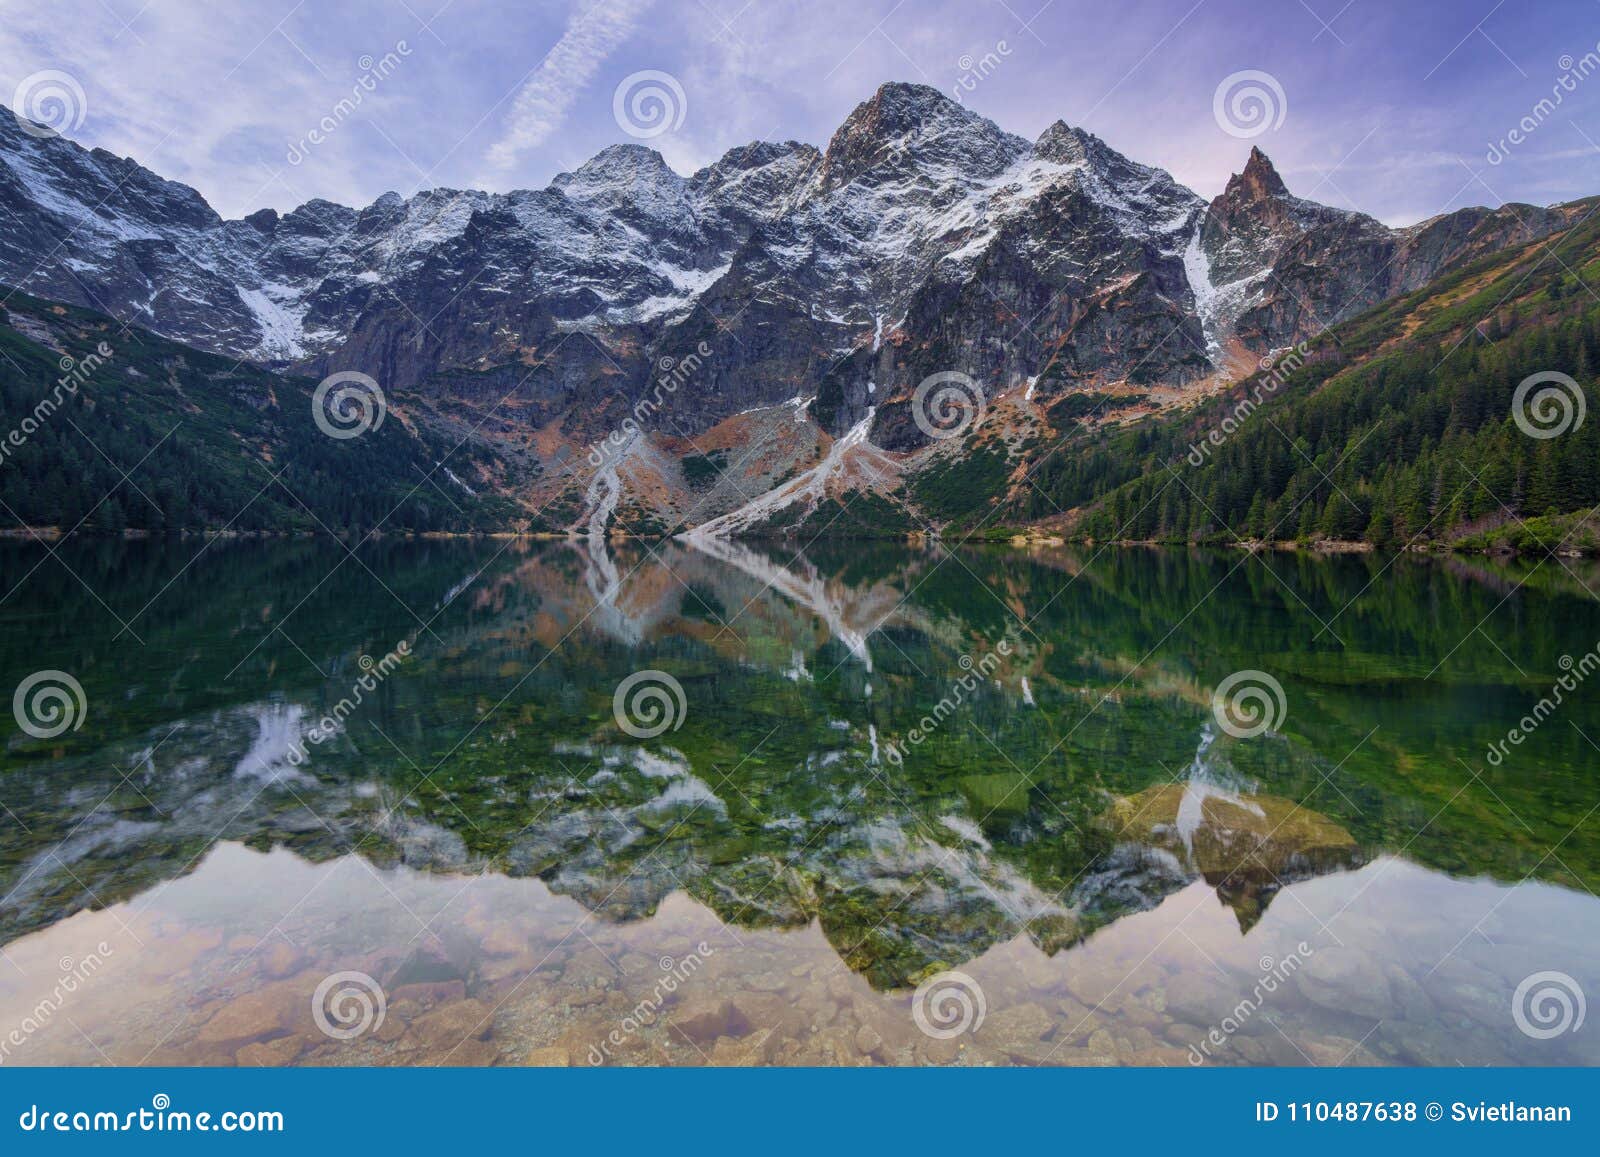 rocky mountains reflection in the calm lake water.